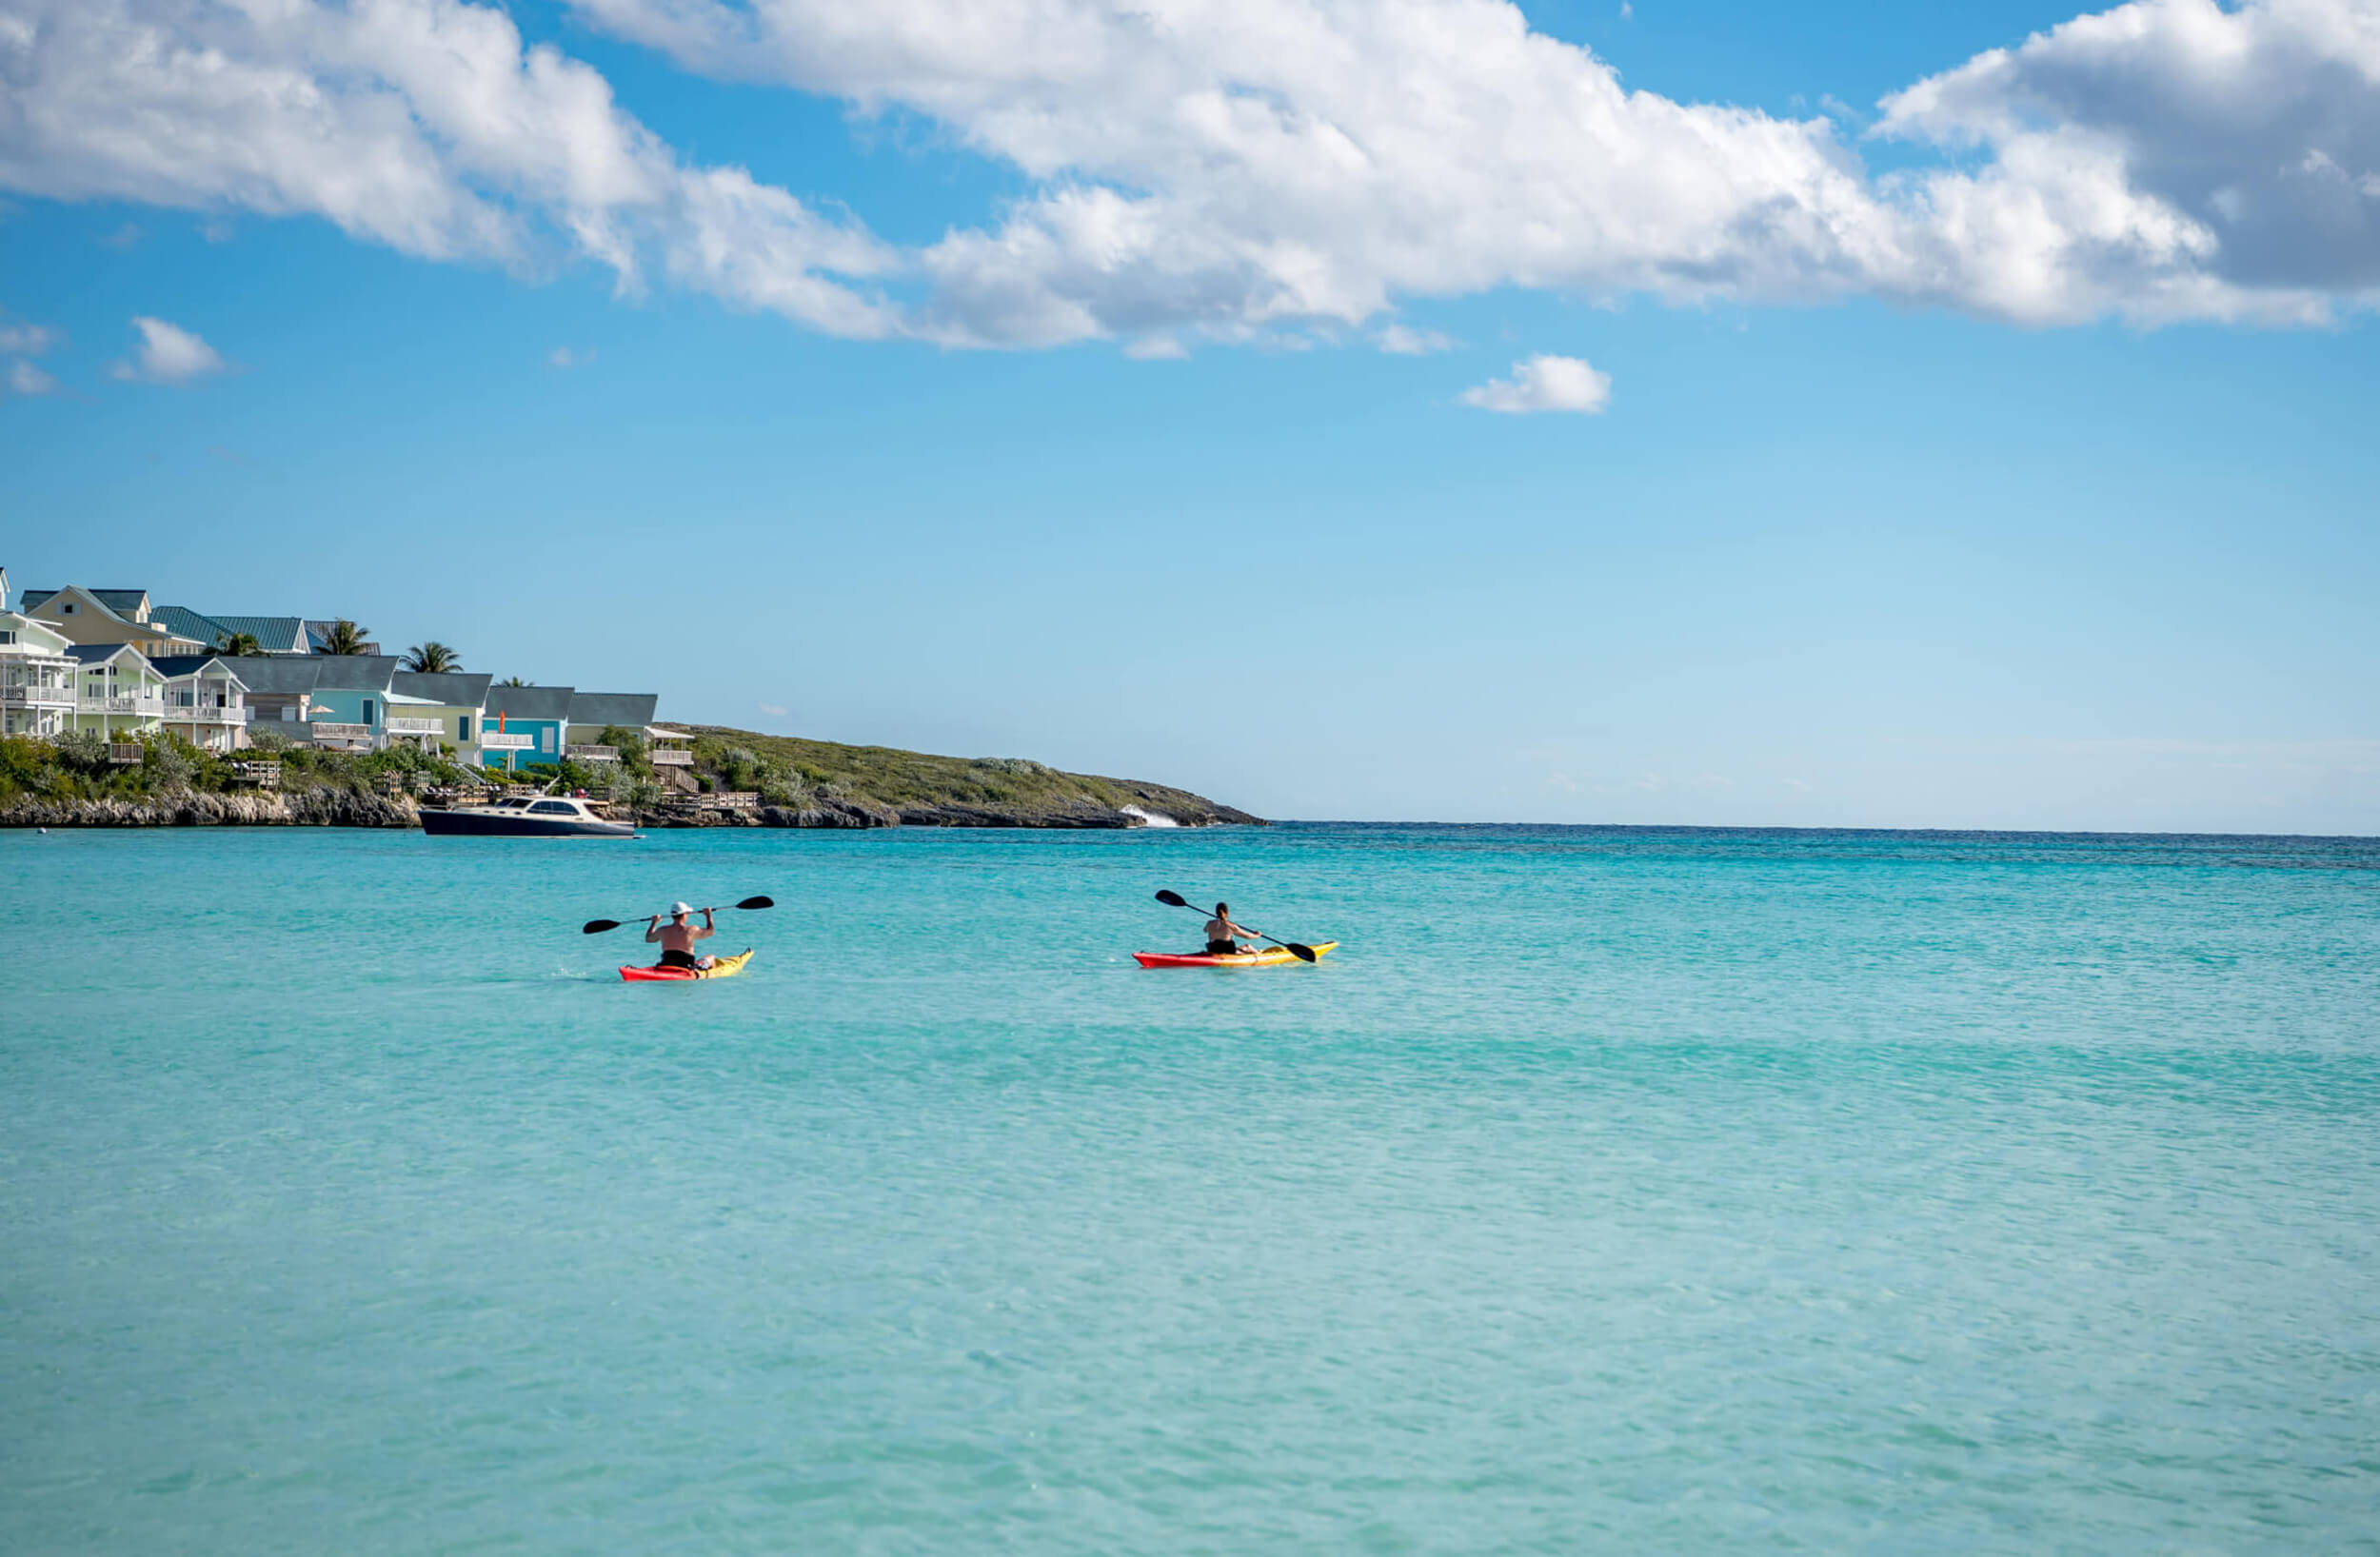 Kayakers exploring the calm waters near The Abaco Club, partaking in the active and scenic coastal club lifestyle